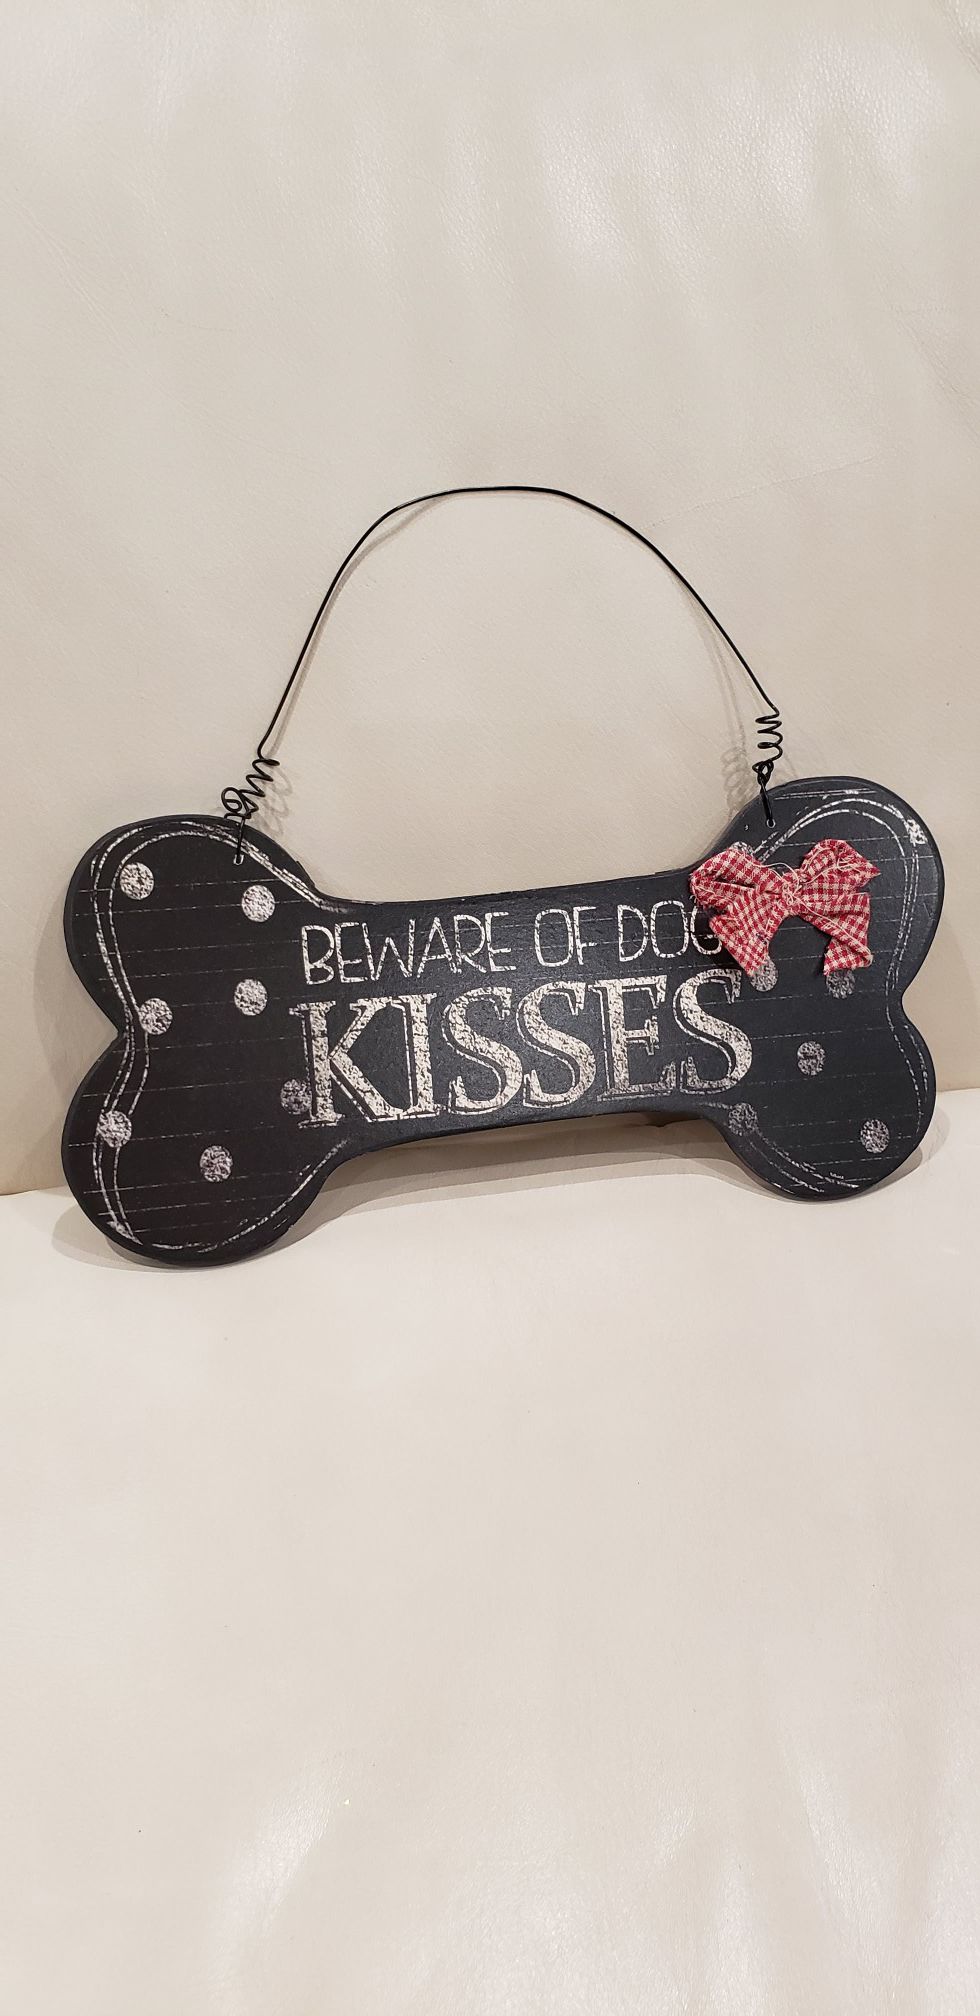 Beware of dog kisses funny decoration 11.75 x 5.6" brand new easy to hang on front door, garage and more. With white red fabric bow.